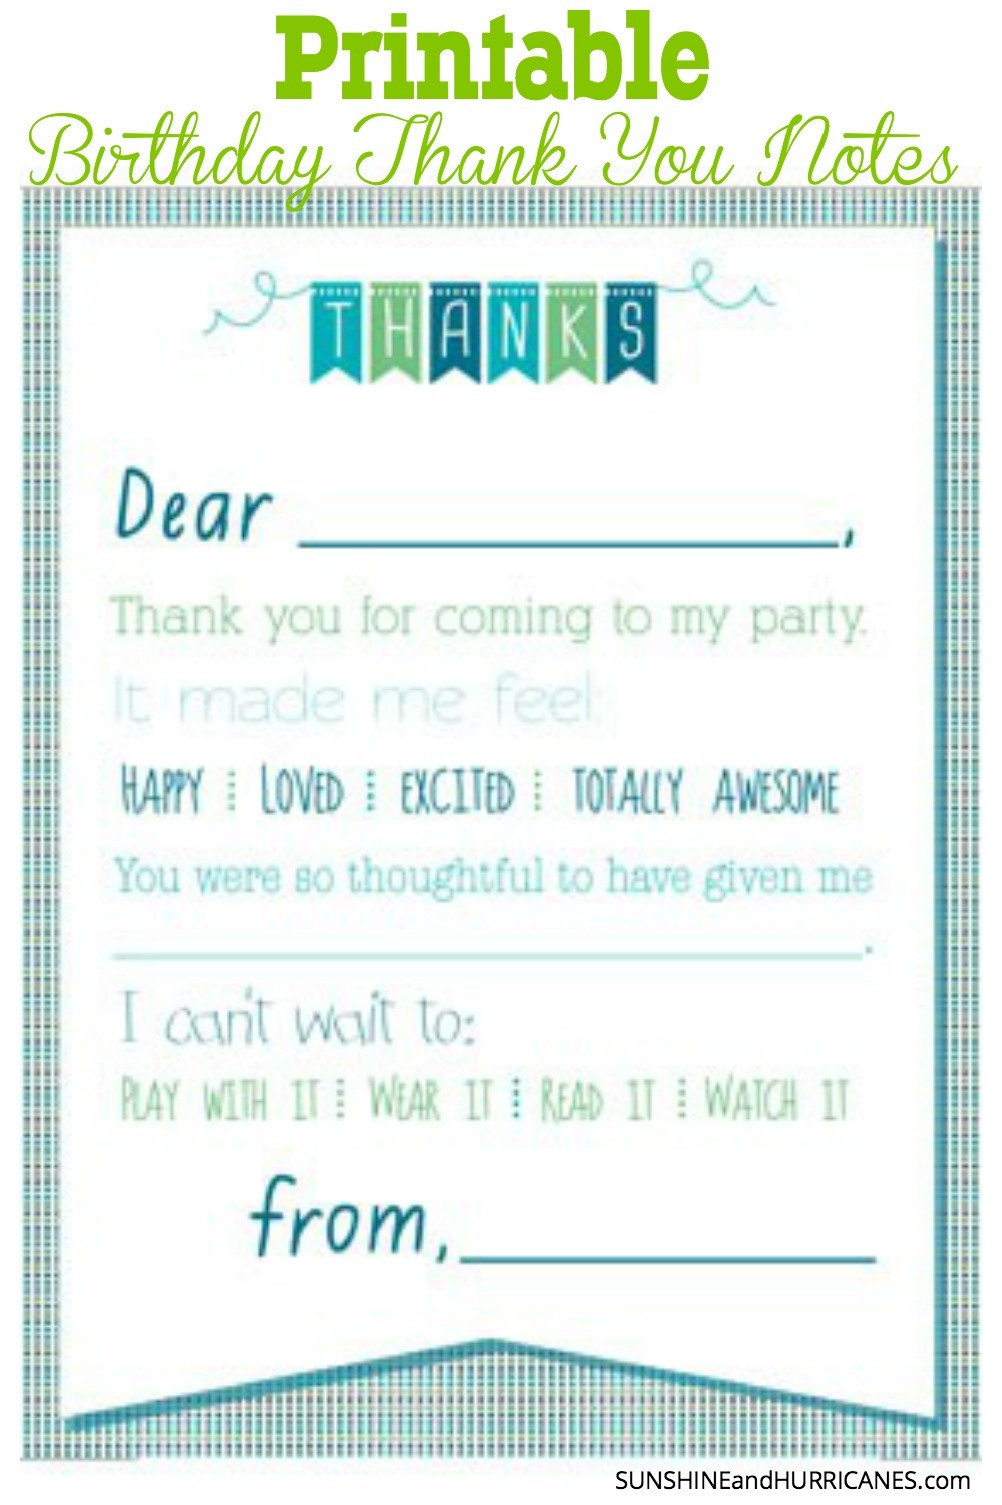 Thank You Notes For Birthday Gift
 Printable Birthday Thank You Notes